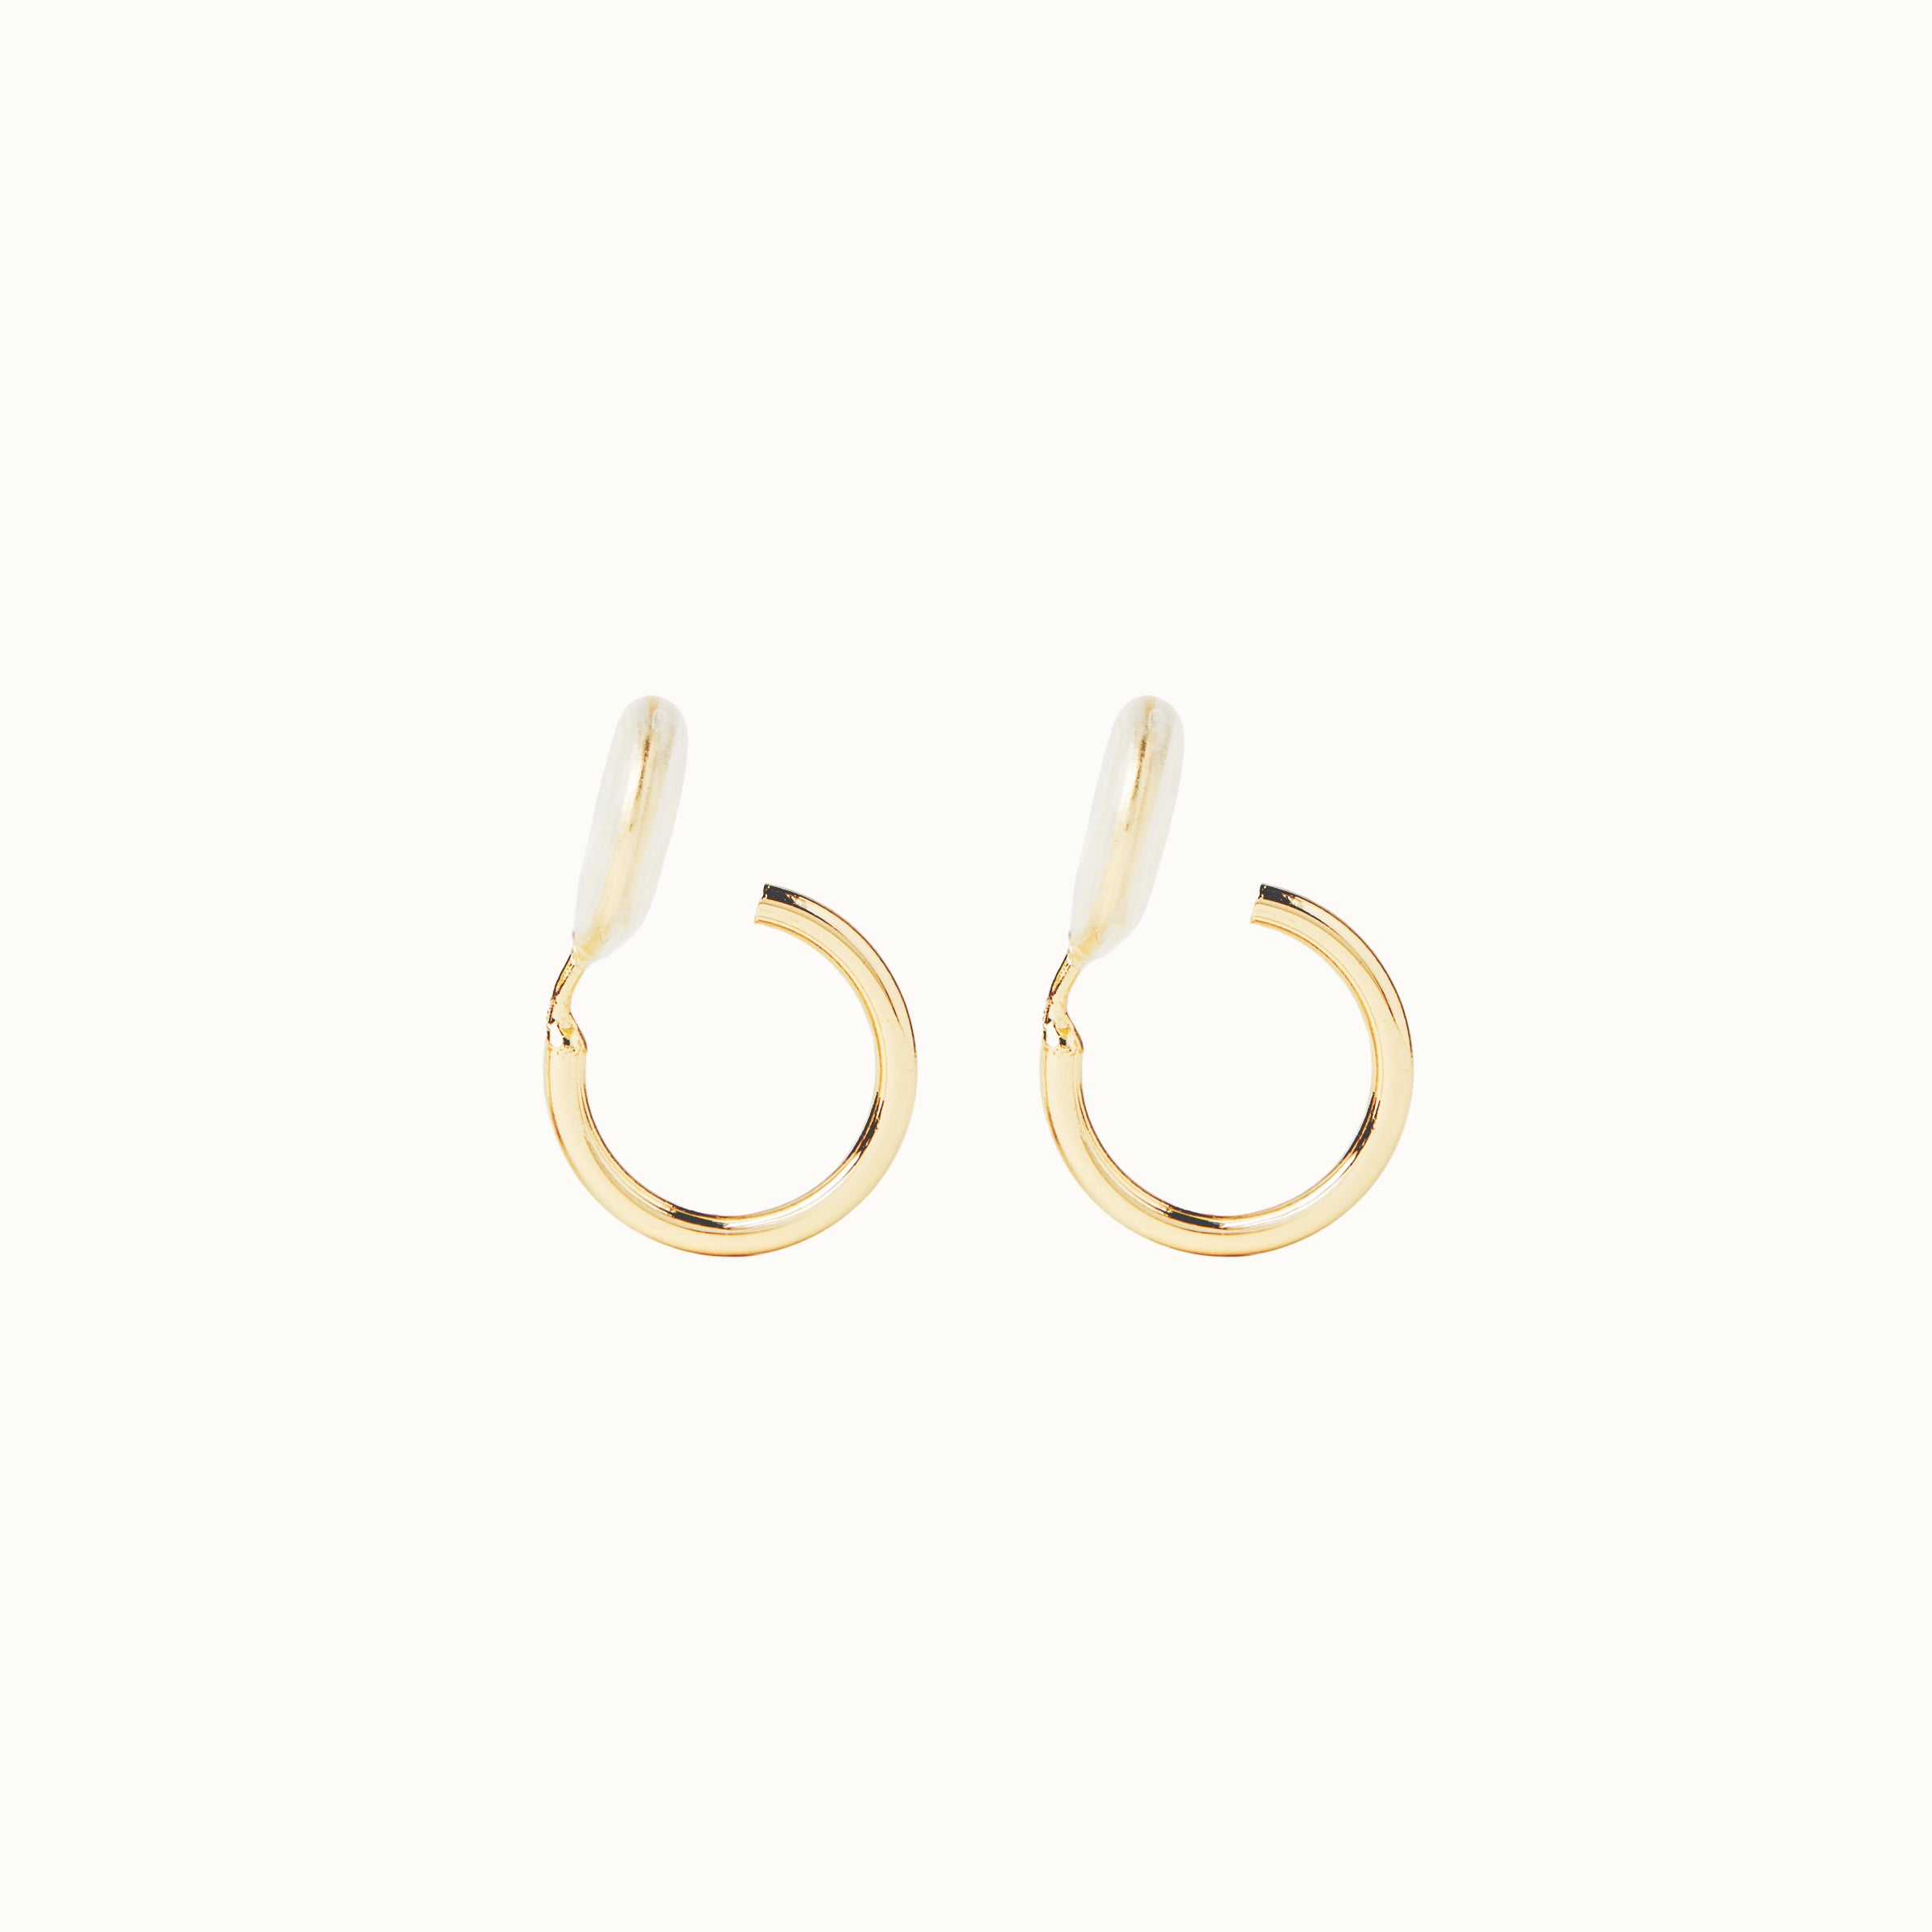 Image of the Tiny Hoop Clip On Earrings in Gold offer a Mosquito Coil Clip-On Closure, designed for comfort and versatility. Perfect for various ear types, they provide a secure hold and comfortable wear for 24 hours. 